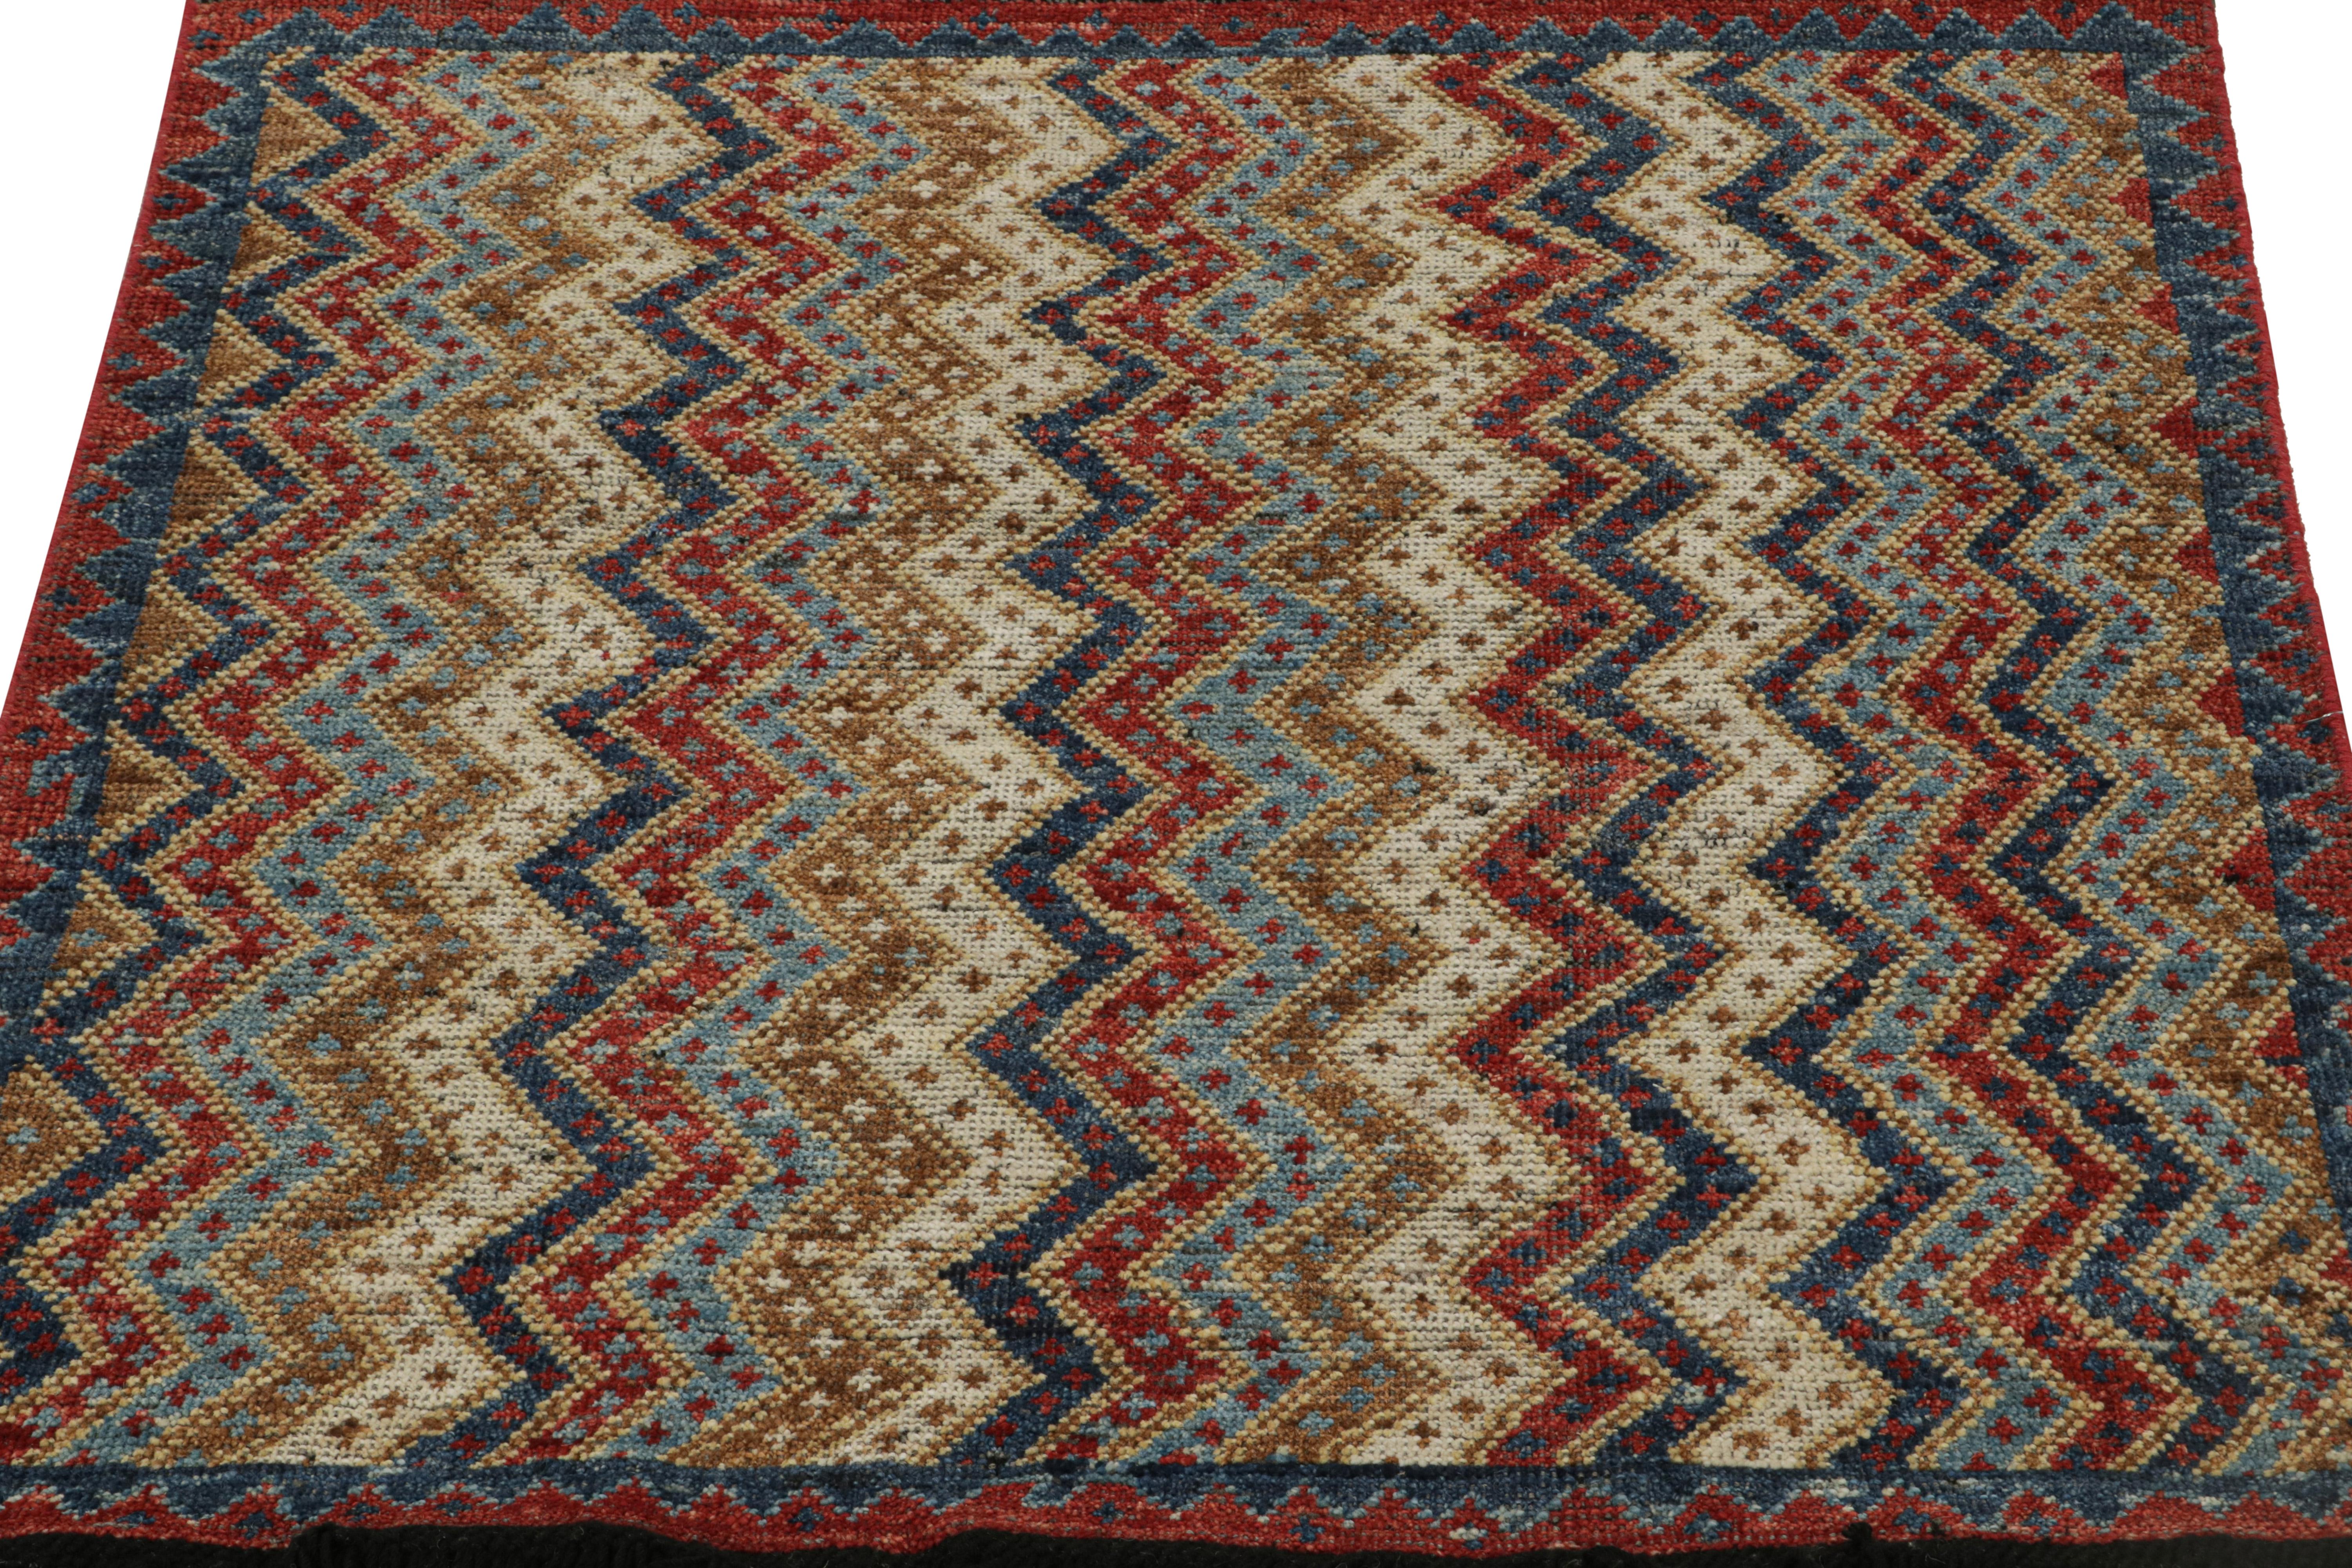 Indian Rug & Kilim’s Antique Tribal Style rug in Red, Blue, Brown & White Patterns For Sale